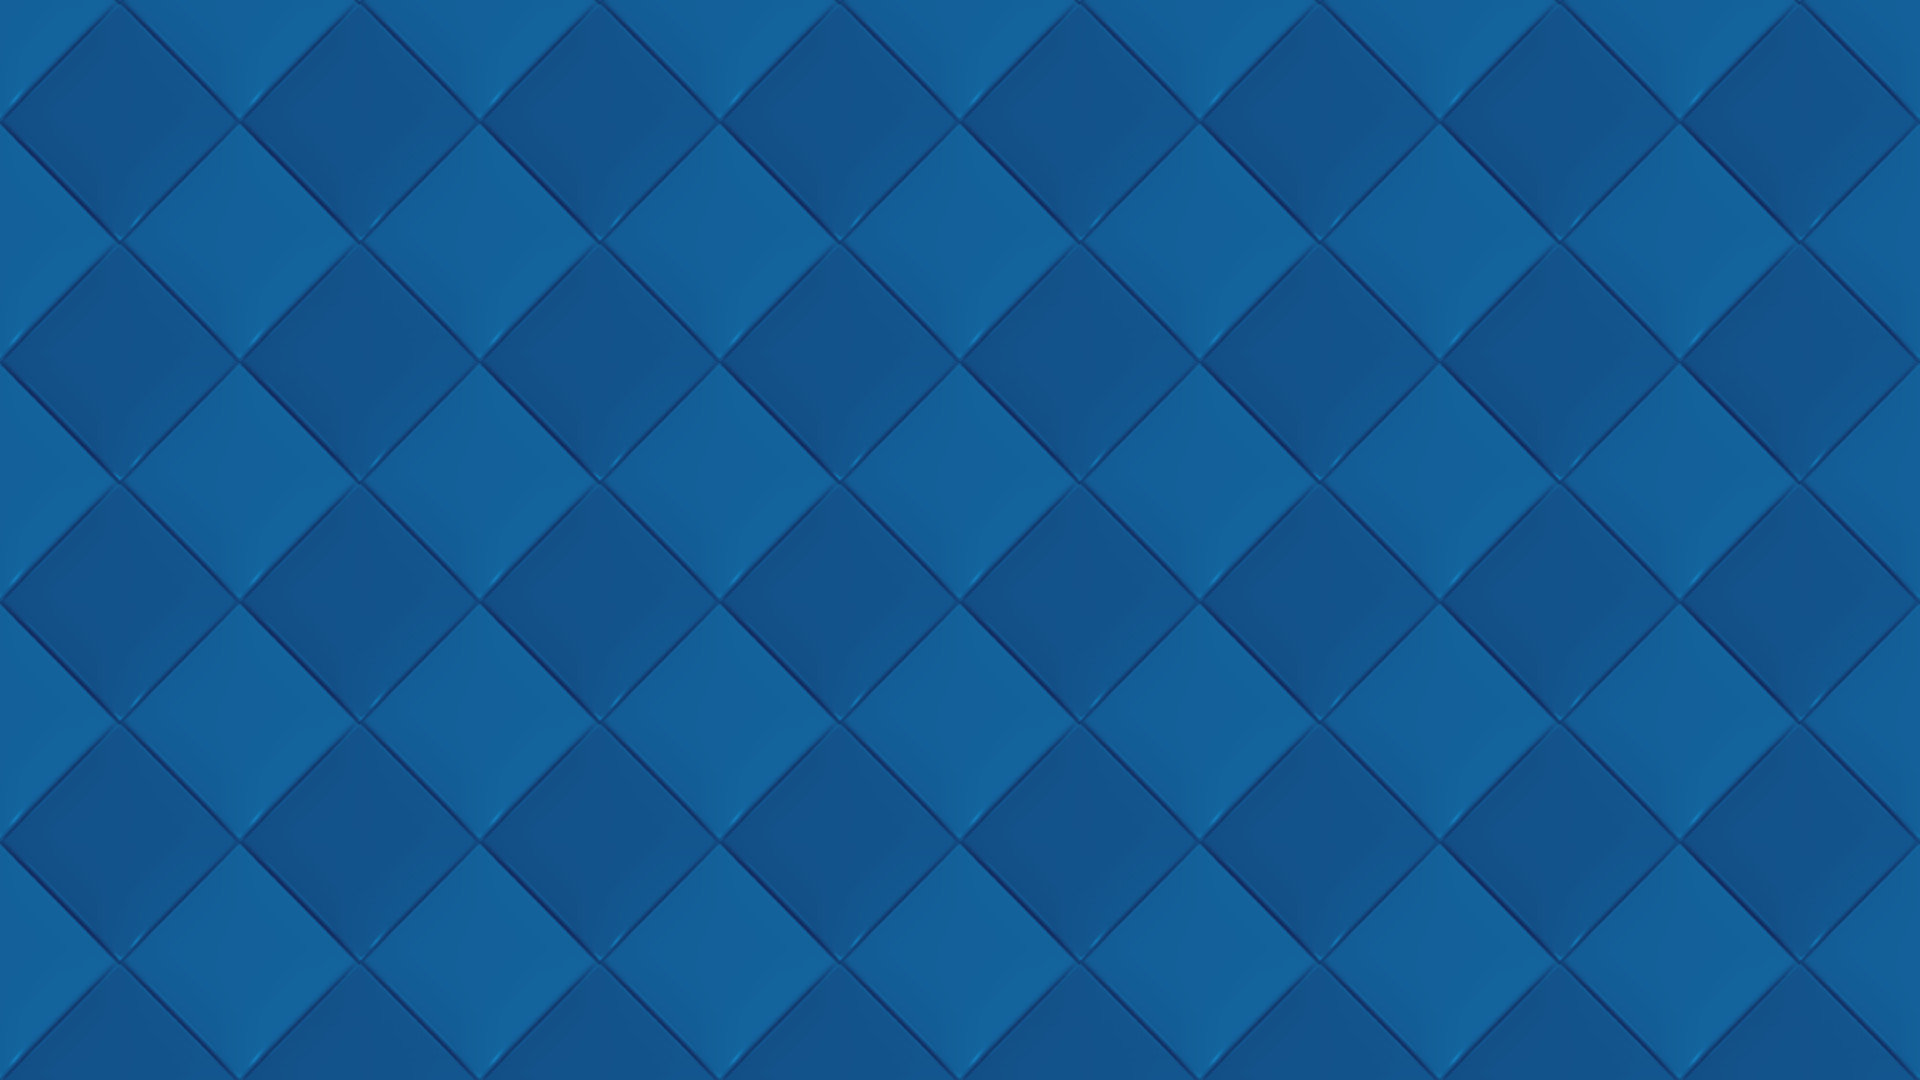 1920x1080 Clash Royale Diamond Background -  - Photoshop Quick Tip in the  comments!